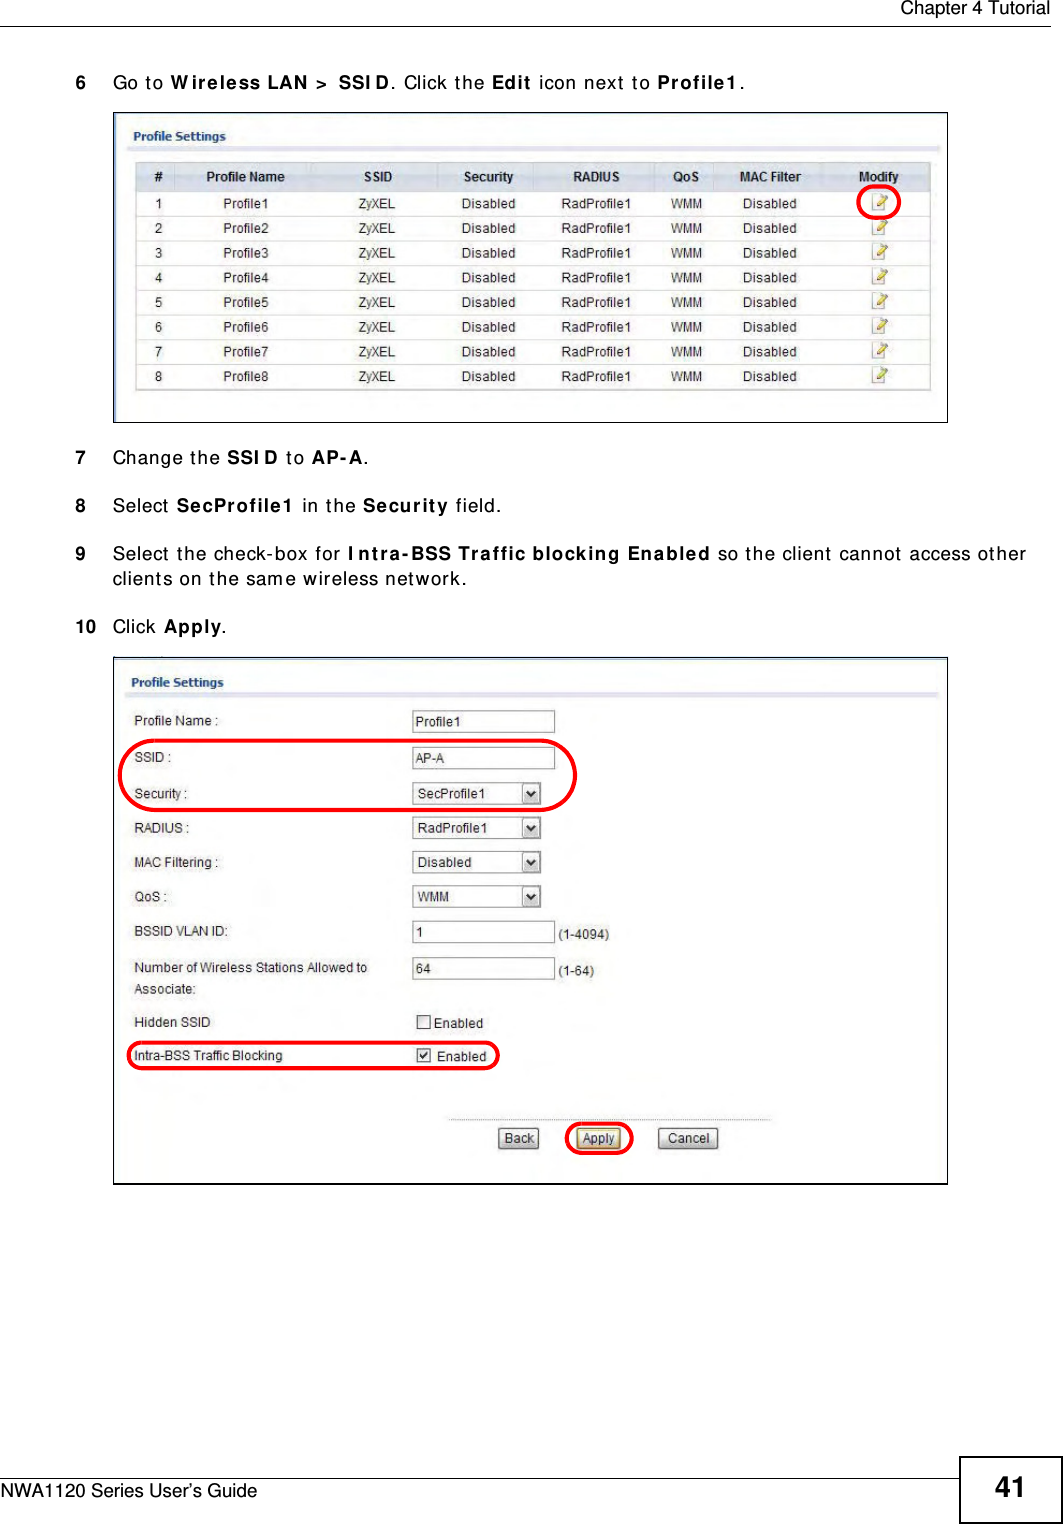  Chapter 4 TutorialNWA1120 Series User’s Guide 416Go to Wireless LAN &gt; SSID. Click the Edit icon next to Profile1.7Change the SSID to AP-A. 8Select SecProfile1 in the Security field. 9Select the check-box for Intra-BSS Traffic blocking Enabled so the client cannot access other clients on the same wireless network.10 Click Apply.